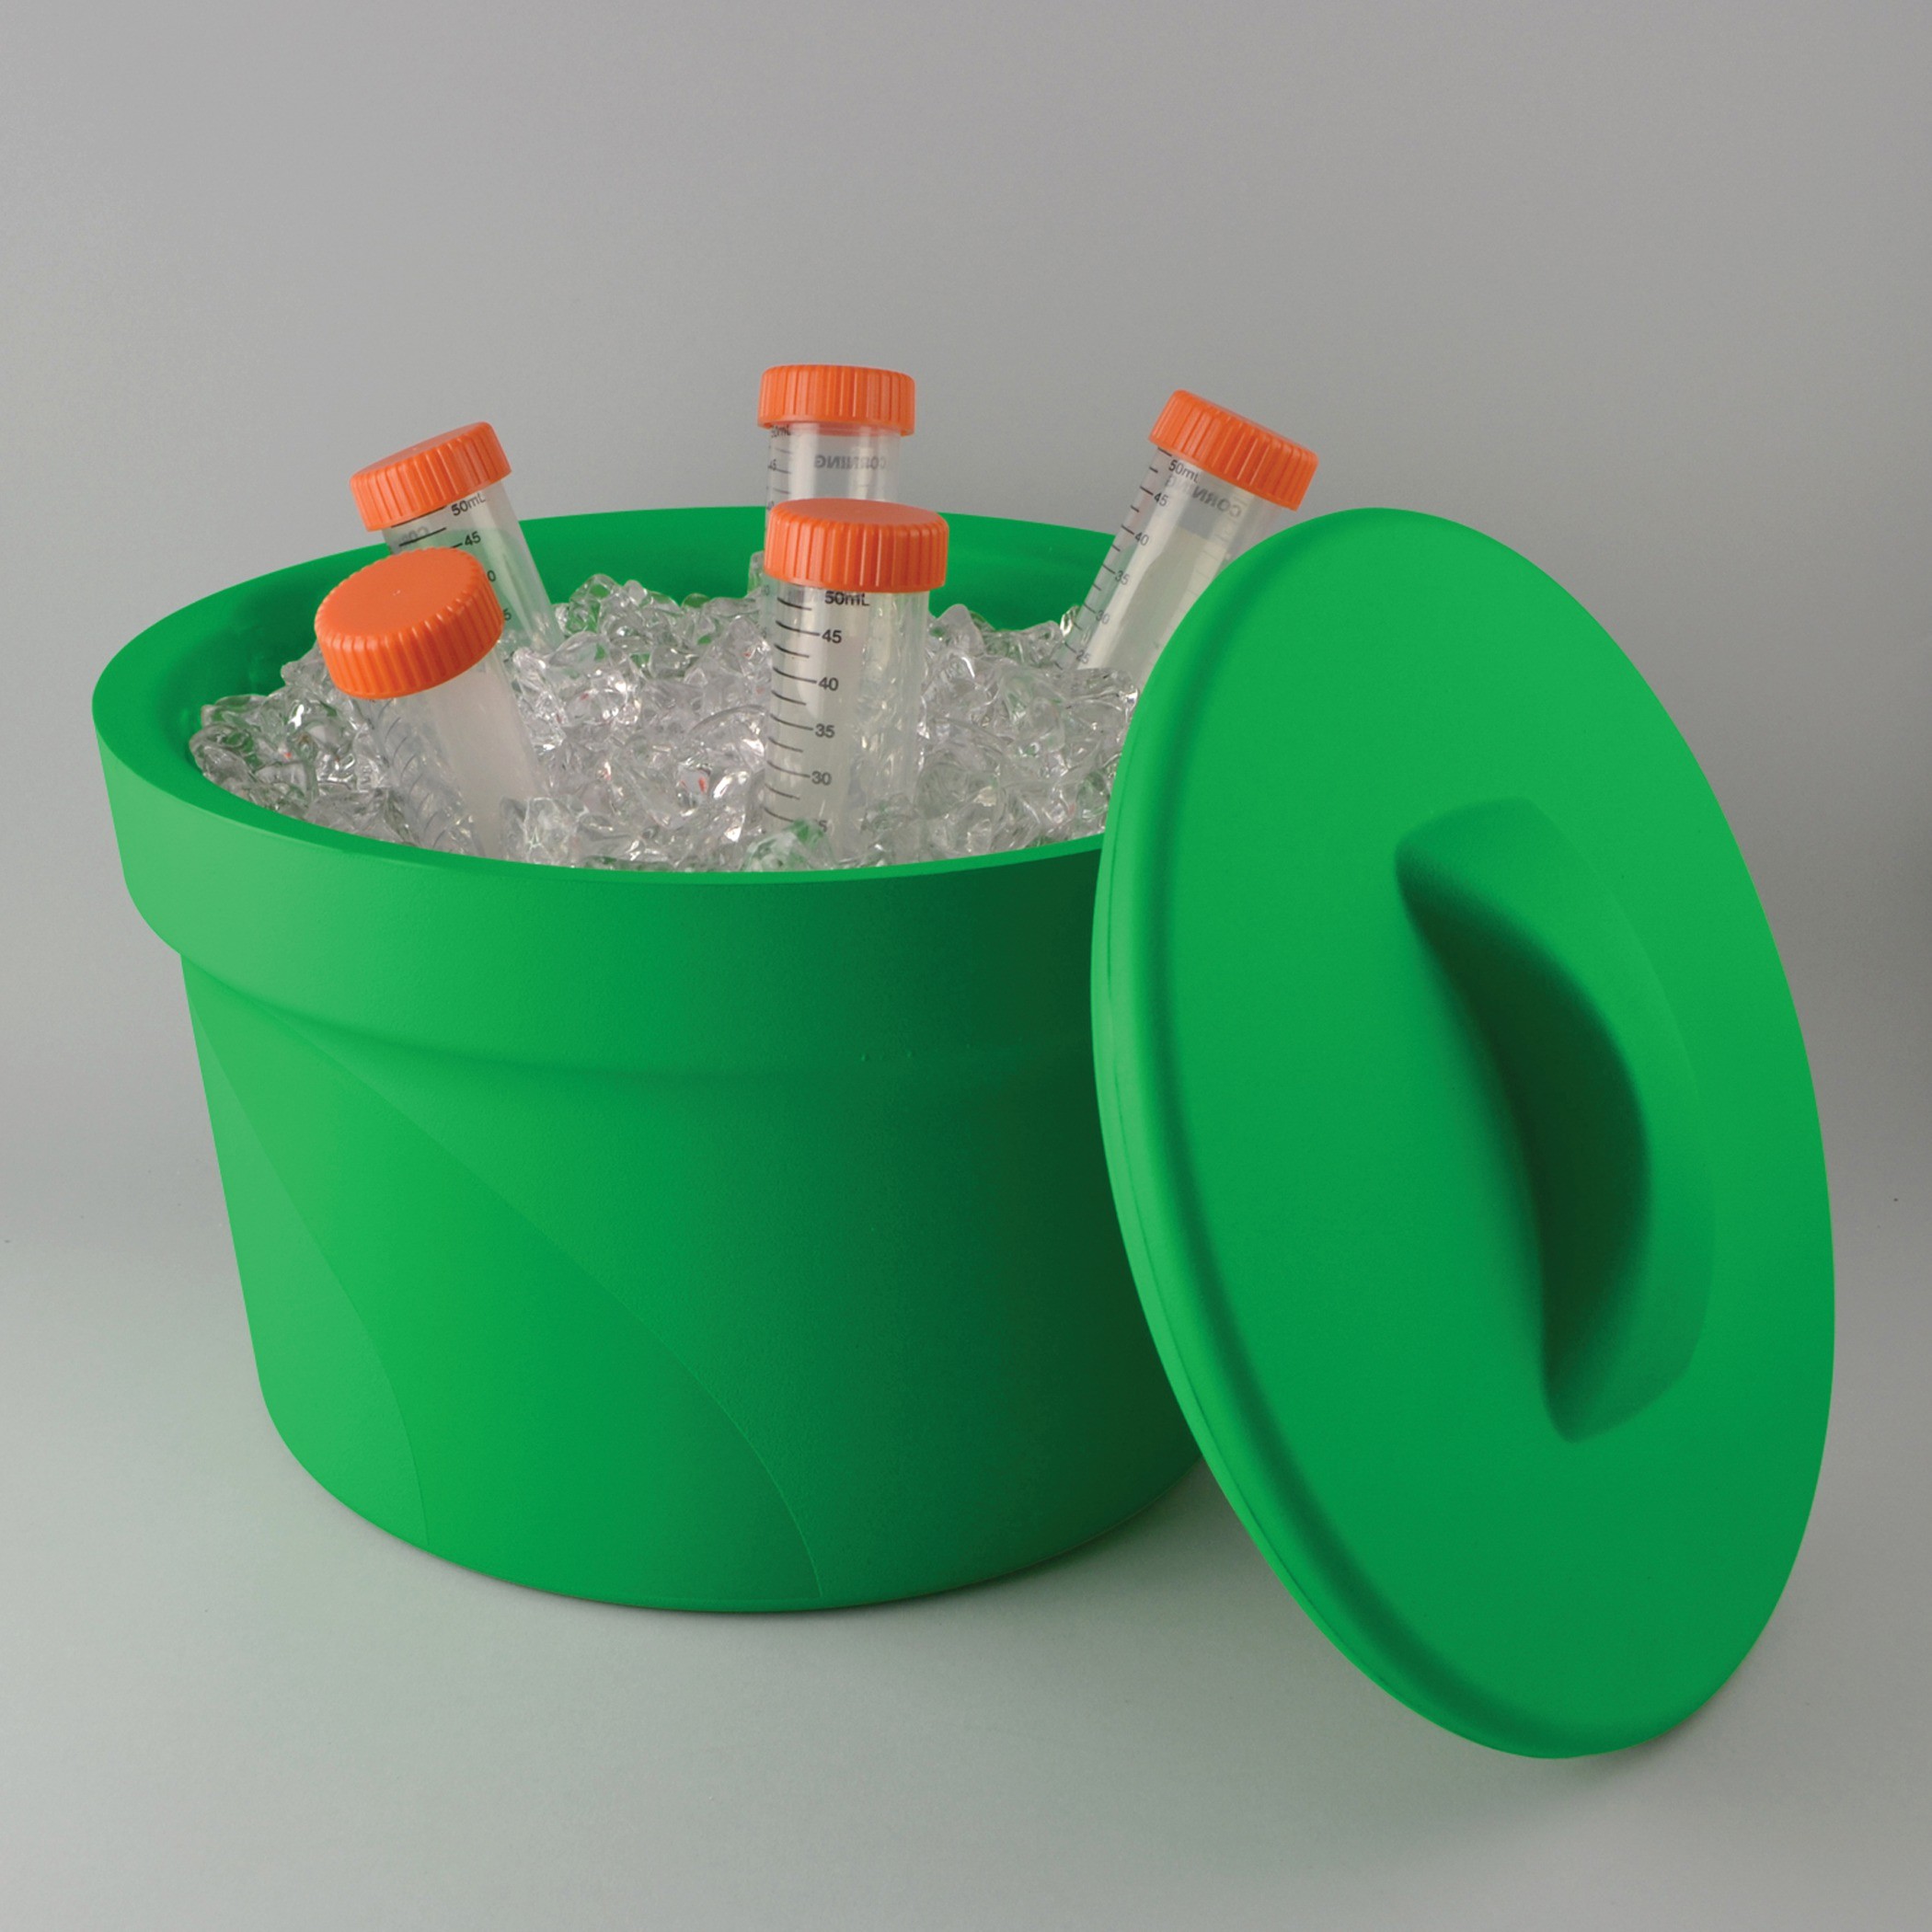 SP Bel-Art Magic Touch 2 High Performance Green Ice Bucket; 2.5 Liter, With Lid